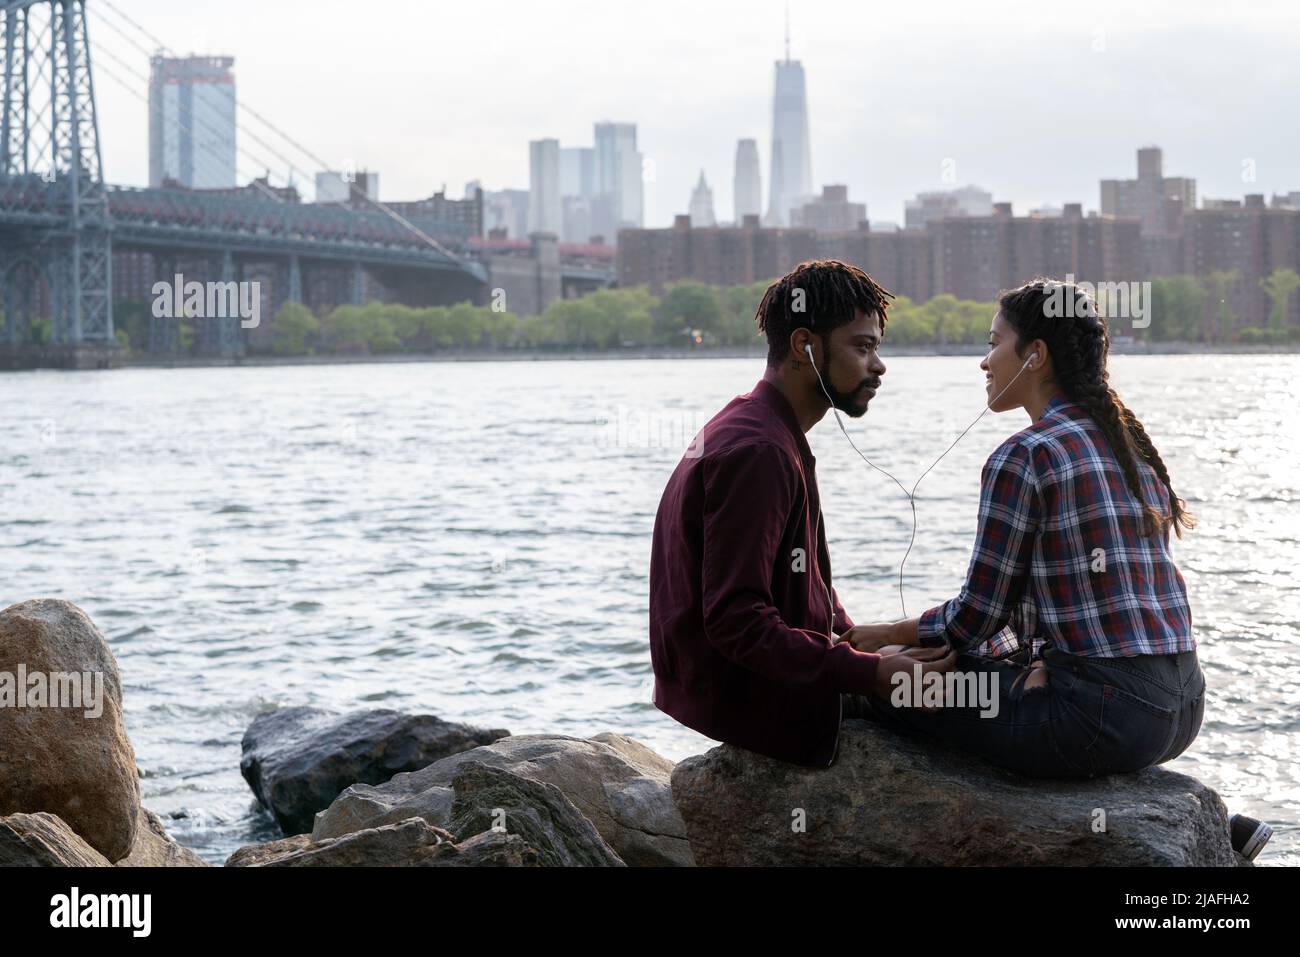 GINA RODRIGUEZ and LAKEITH STANFIELD in SOMEONE GREAT (2019), directed by JENNIFER KAYTIN ROBINSON. Credit: Feigco Entertainment / Album Stock Photo